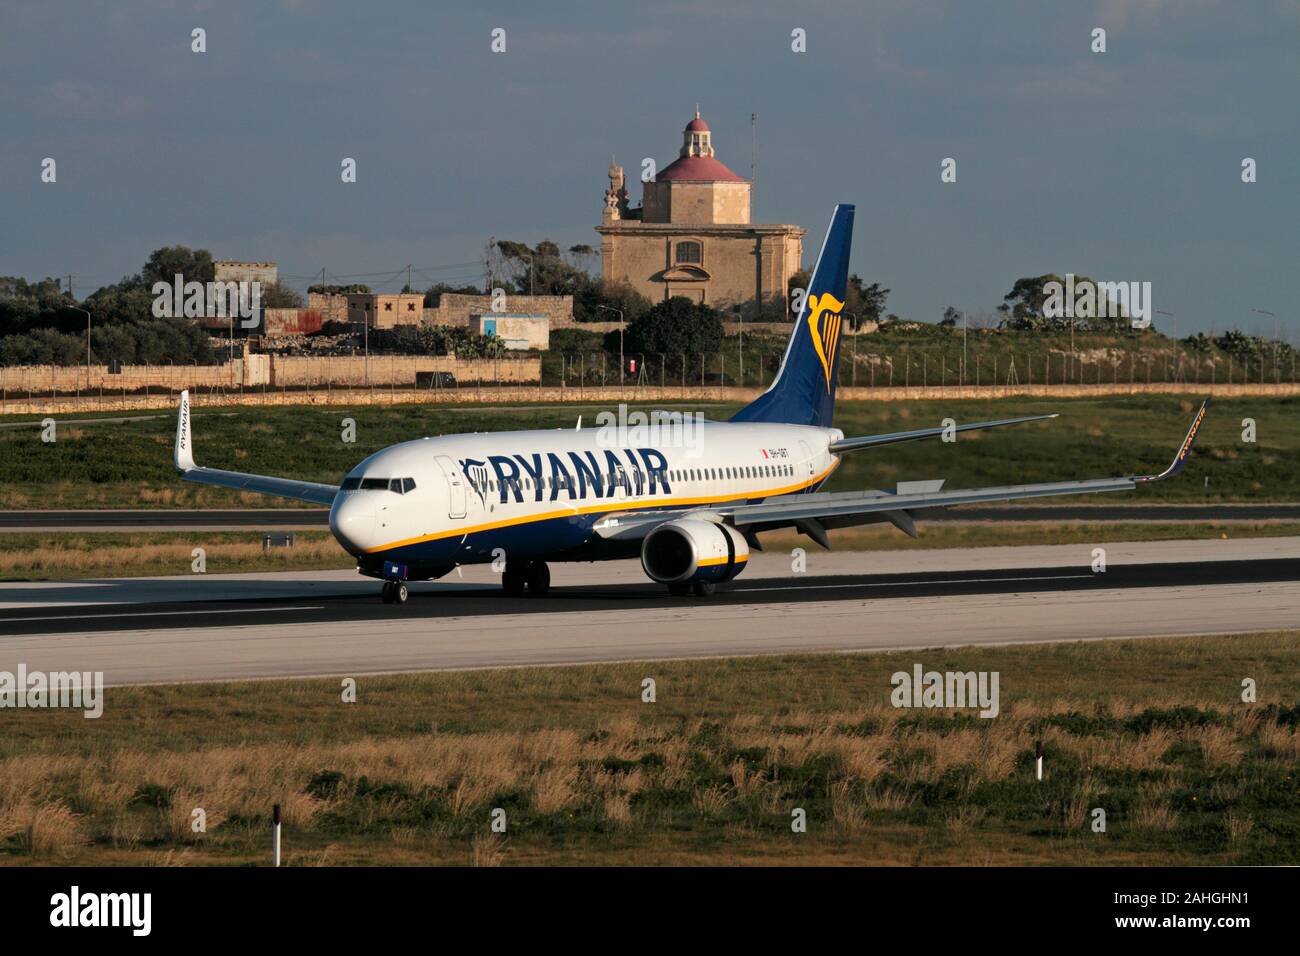 Ryanair Boeing 737-800 passenger jet plane (registered to Malta Air) landing on the runway after a budget flight to Malta. Air travel in the EU. Stock Photo